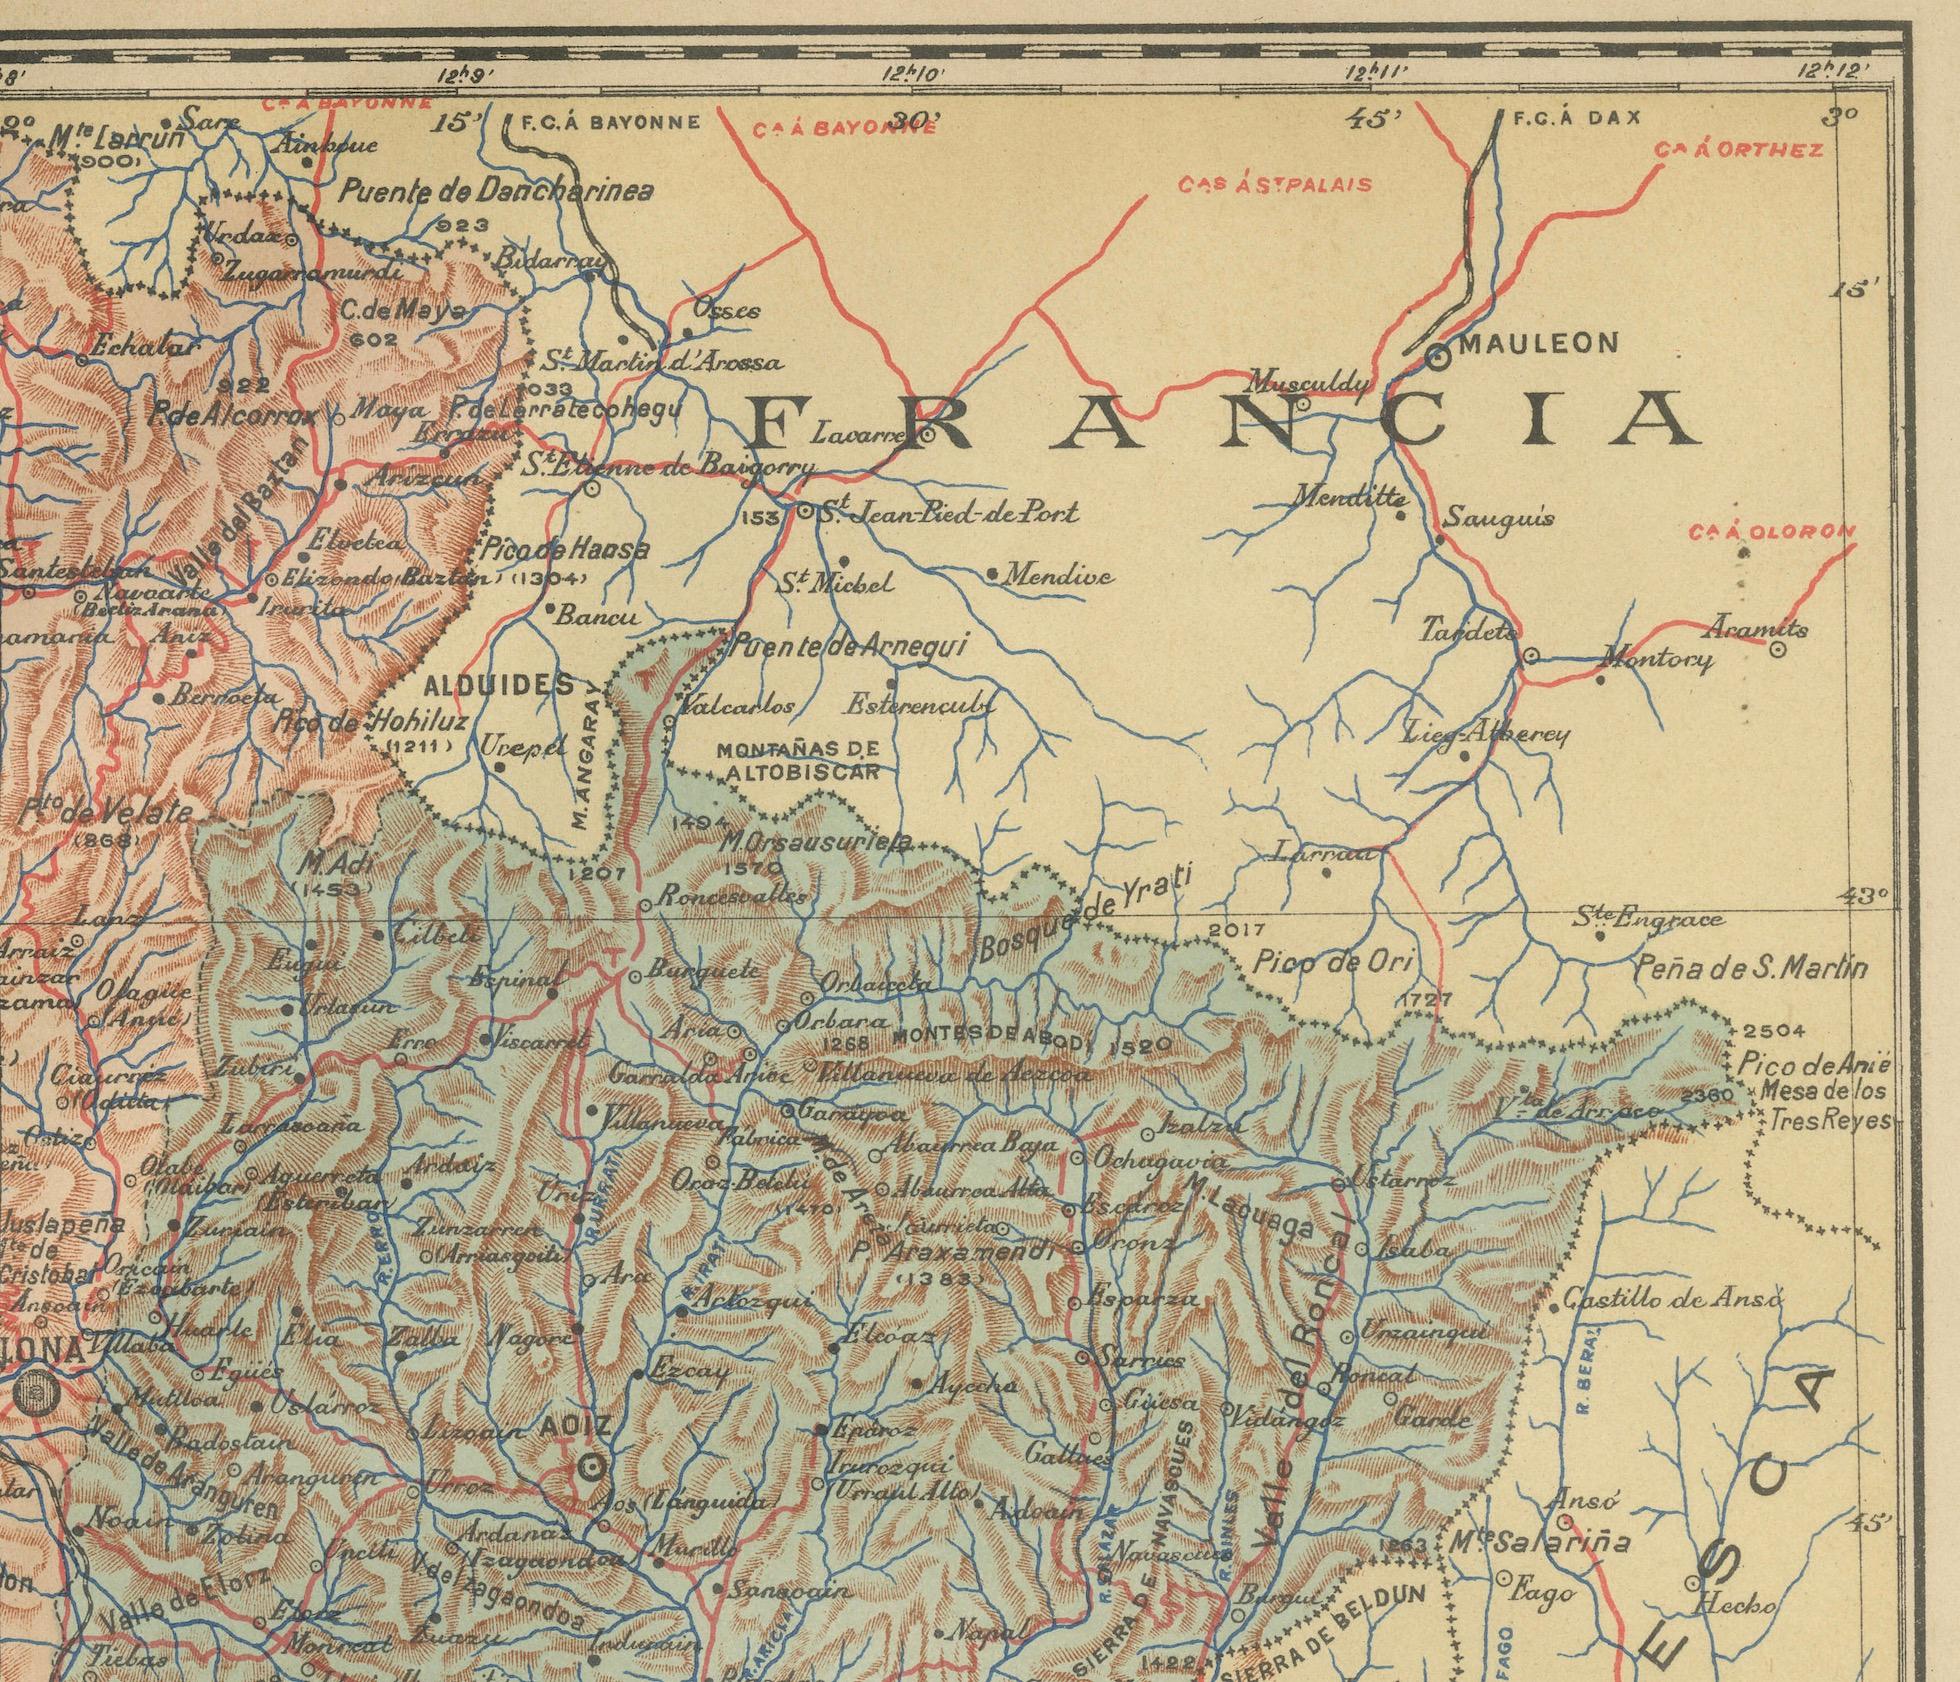 The original antique map for sale shows the Spanish province of Navarra as it was in 1902. Here's a brief description and a potential title for the map:

Description:
- The map details the topography, roadways, and rail lines of Navarra.
-